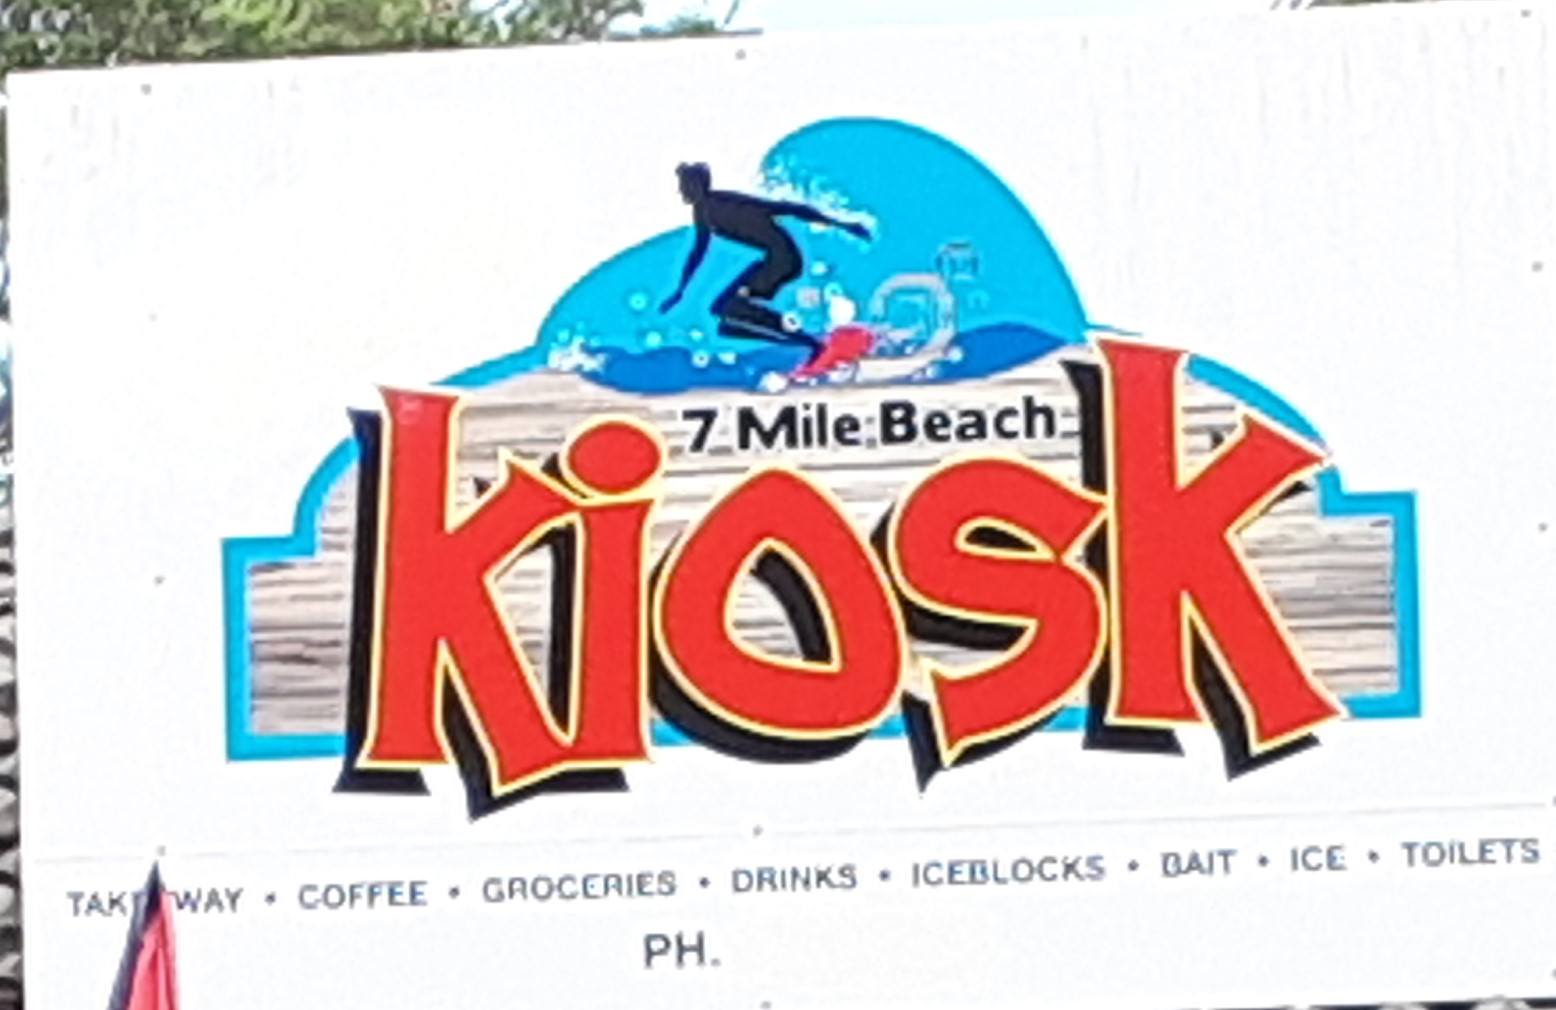 You are currently viewing 5th January 2021 – 7 Mile Beach Kiosk.